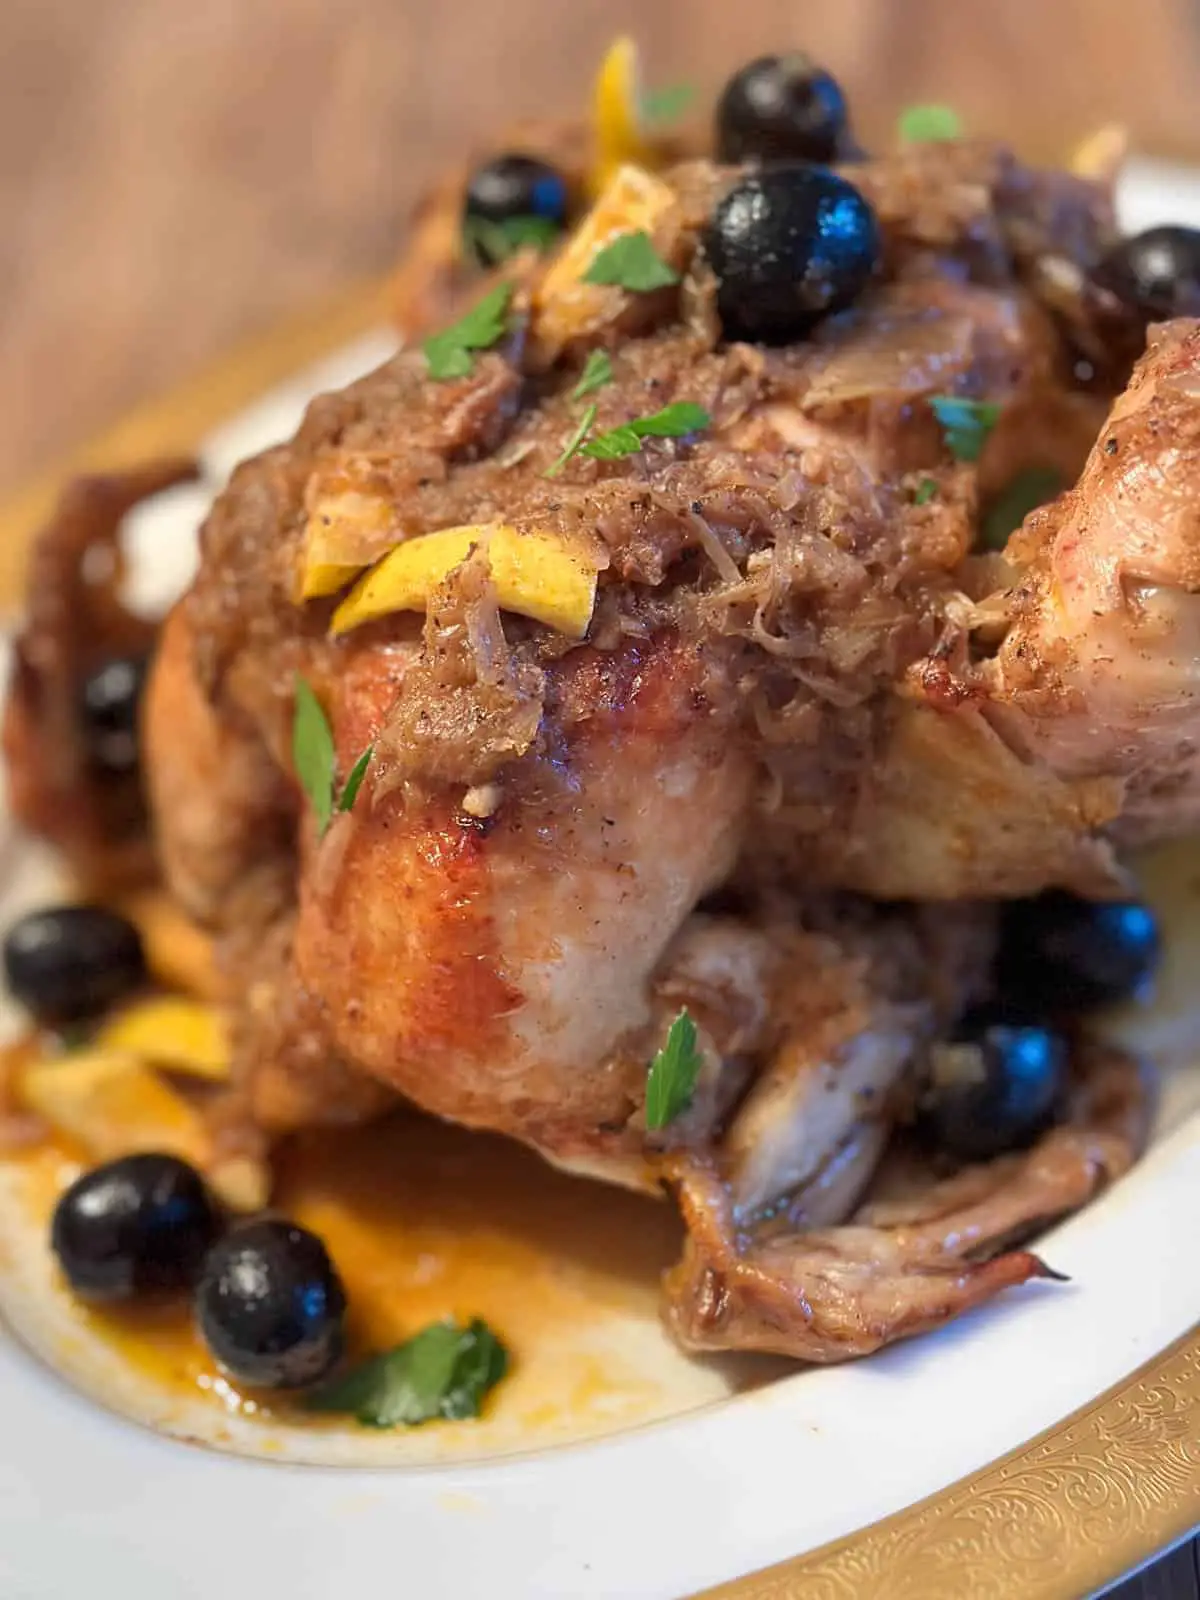 A whole chicken on a white platter rimmed with gold. The chicken is covered with an onion sauce, and there are olives, pieces of lemon rind, and Italian parsley as garnish.